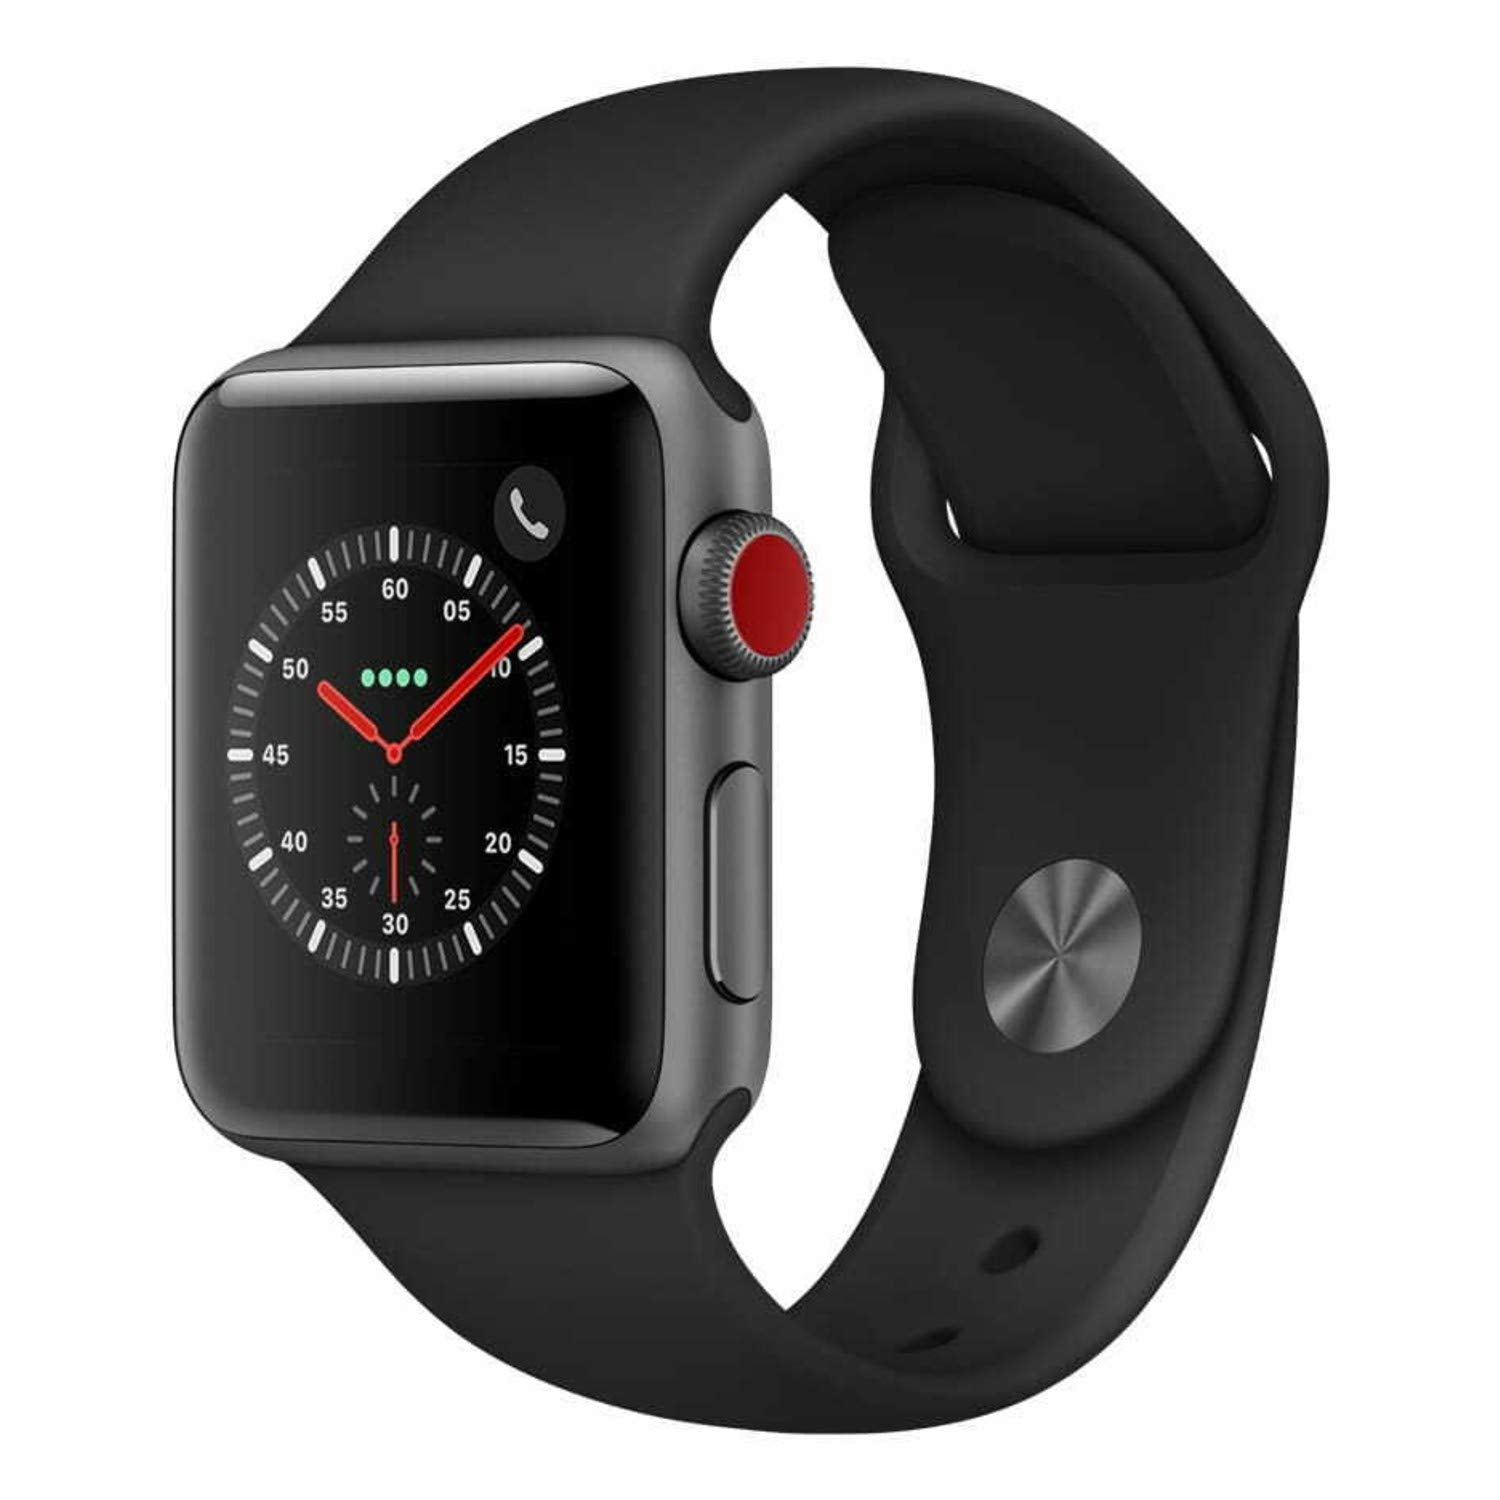 Apple Watch Series 3 42mm Smartwatch (GPS Only, Space Gray Aluminum Case, Black Sport Band)